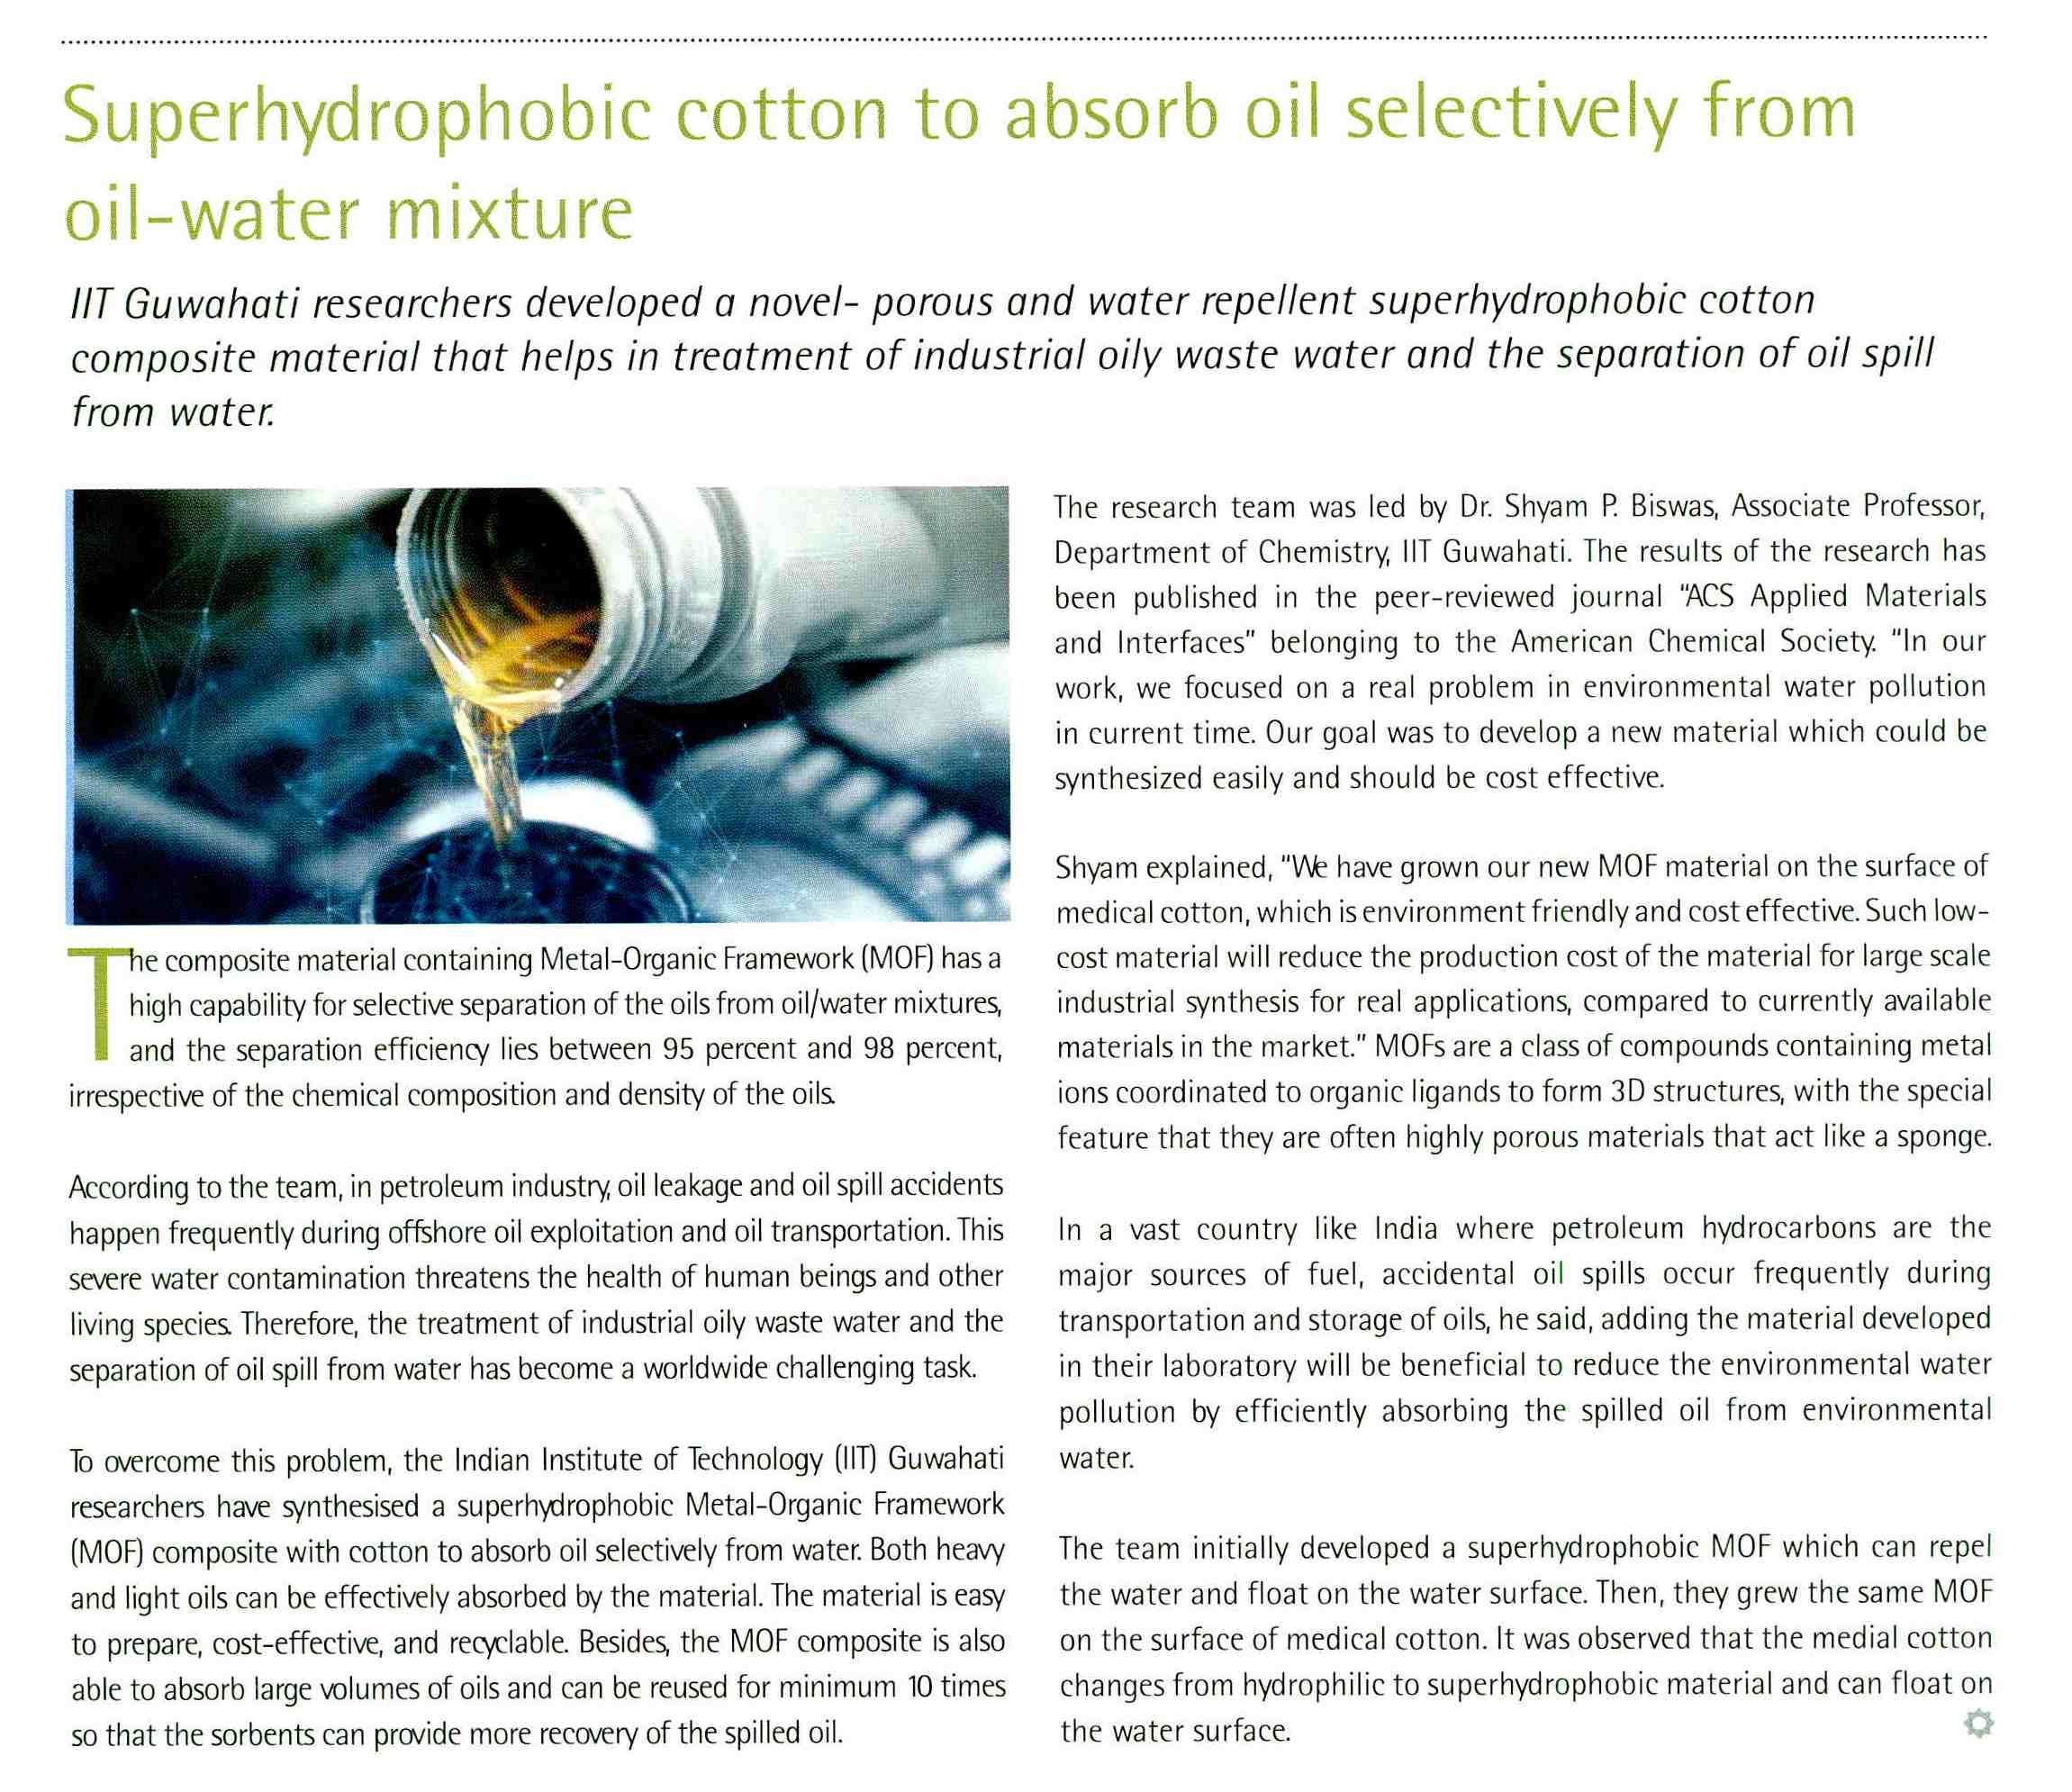 Superhydrophobic cotton to absorb oil selectively from oil-water mixture